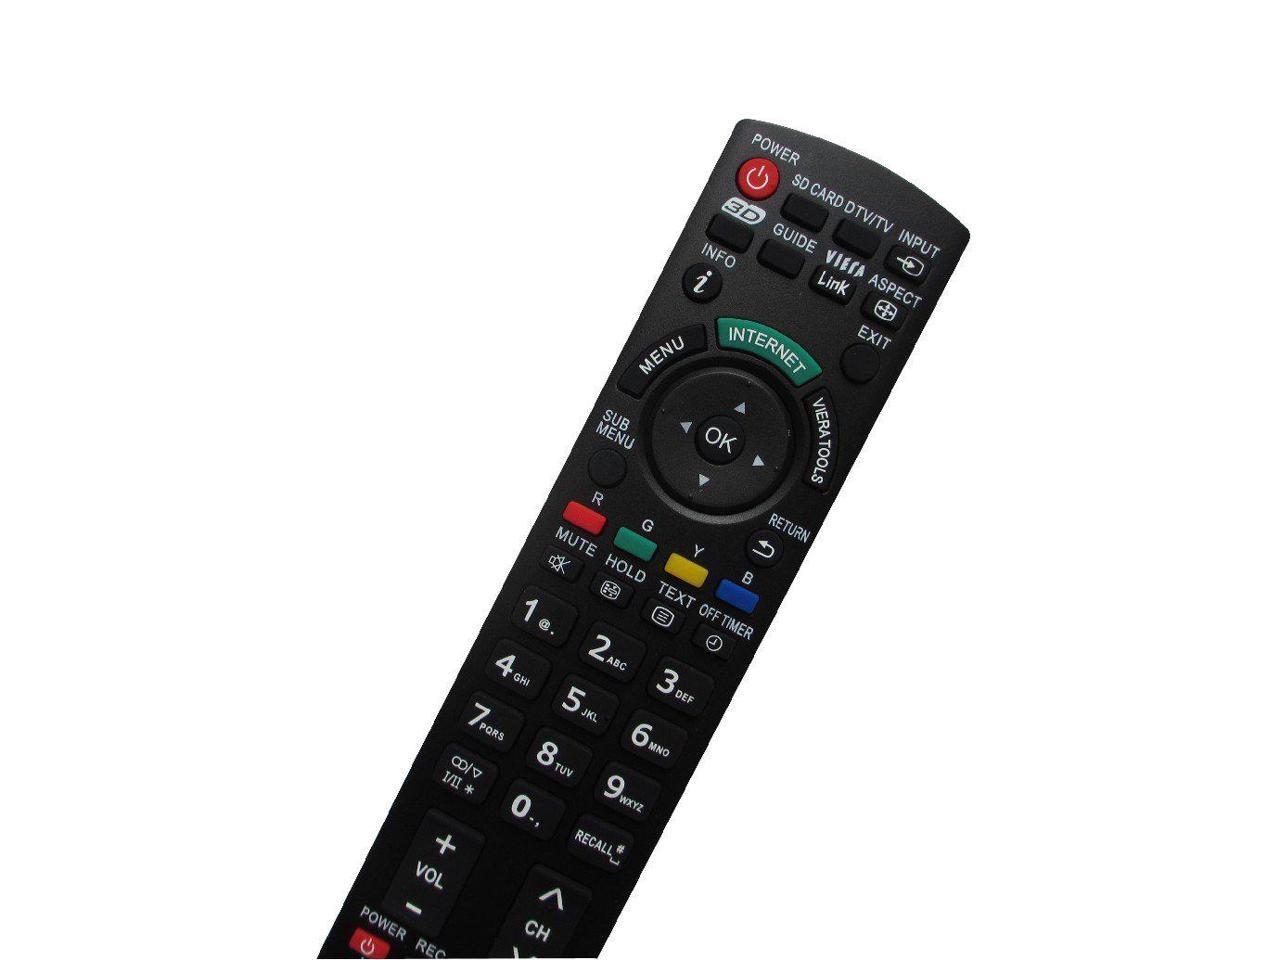 New Design 3D TV Remote Control for Panasonic TH-42PX60 TH-50PX60 TH-42PX60B 